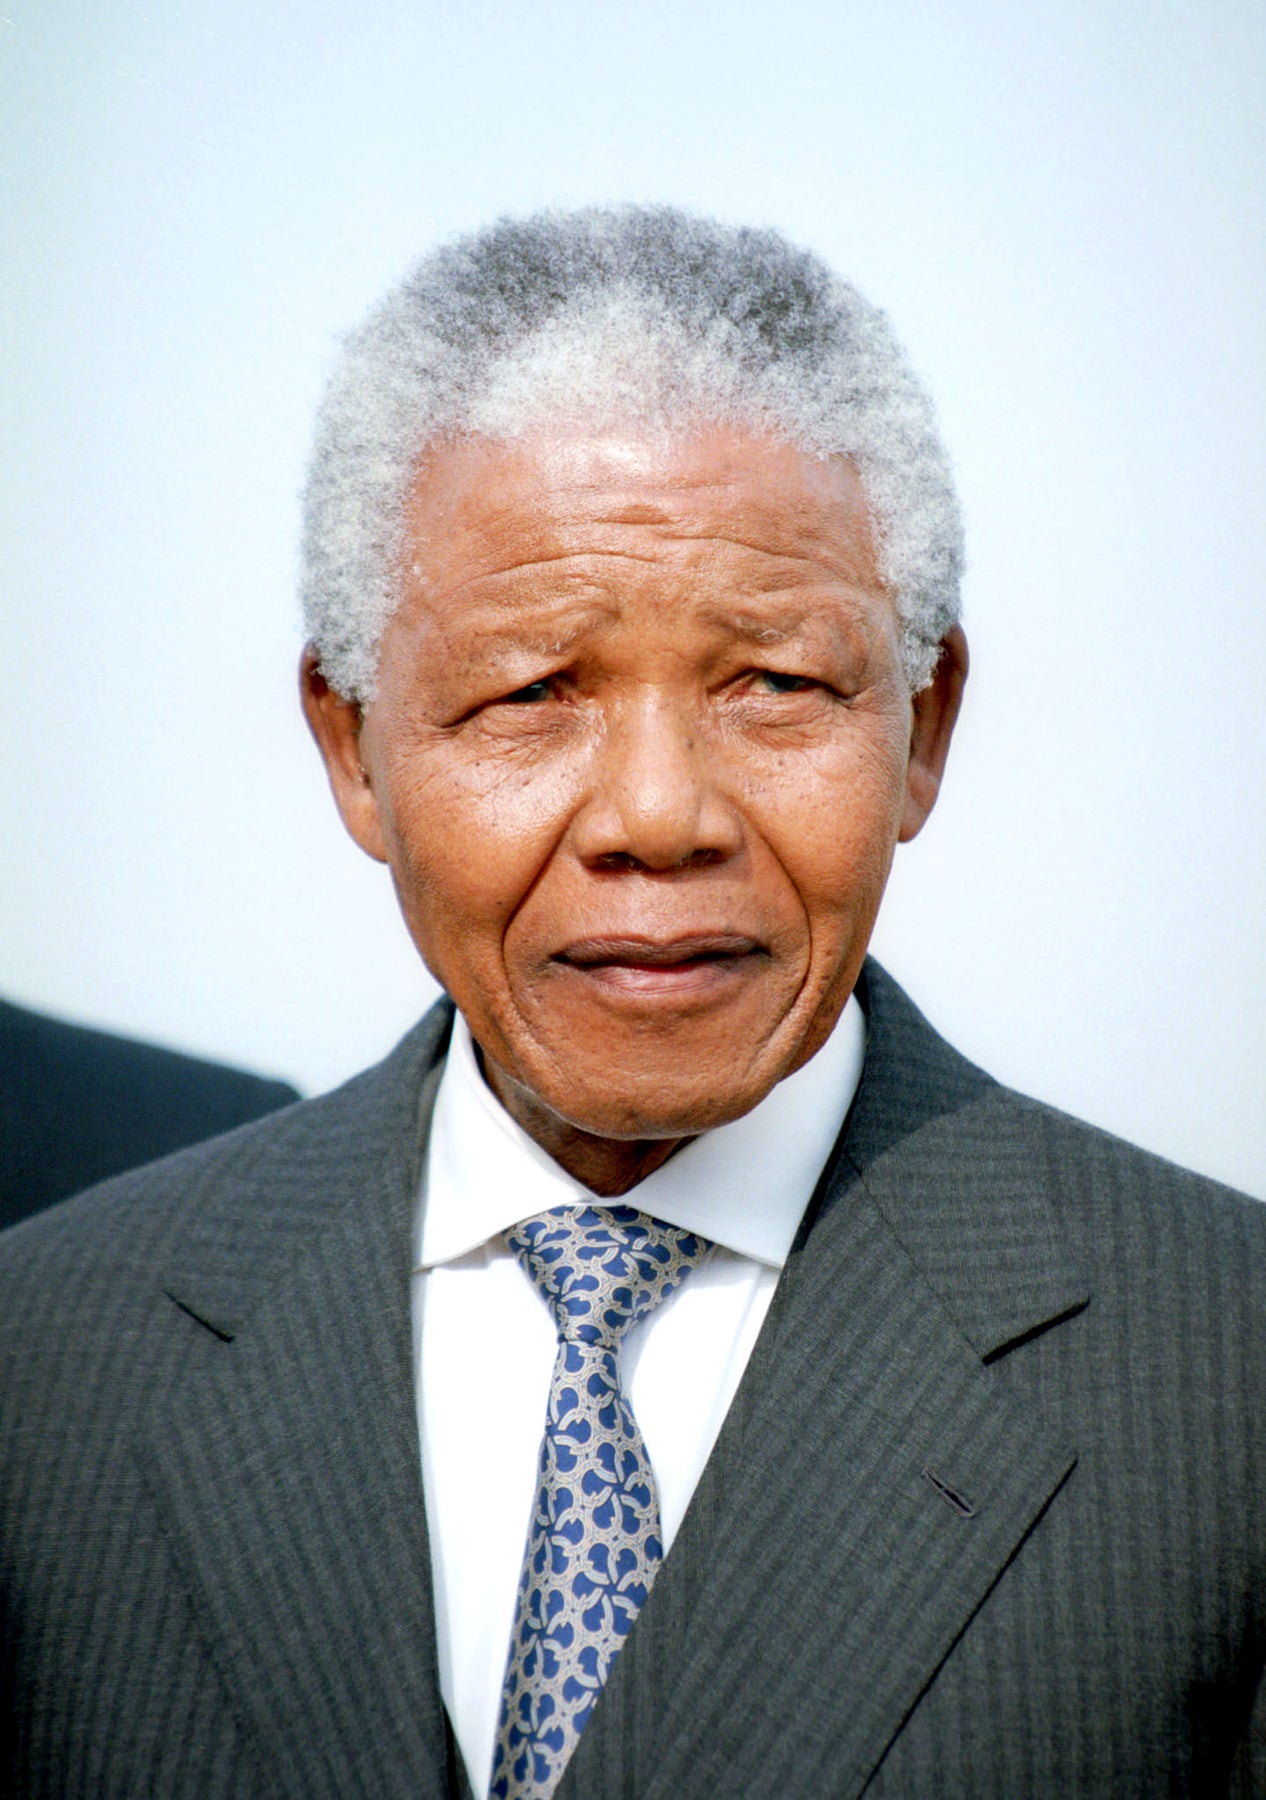 10 Nelson Mandela Quotes That Hit Home In Today's Political Climate
